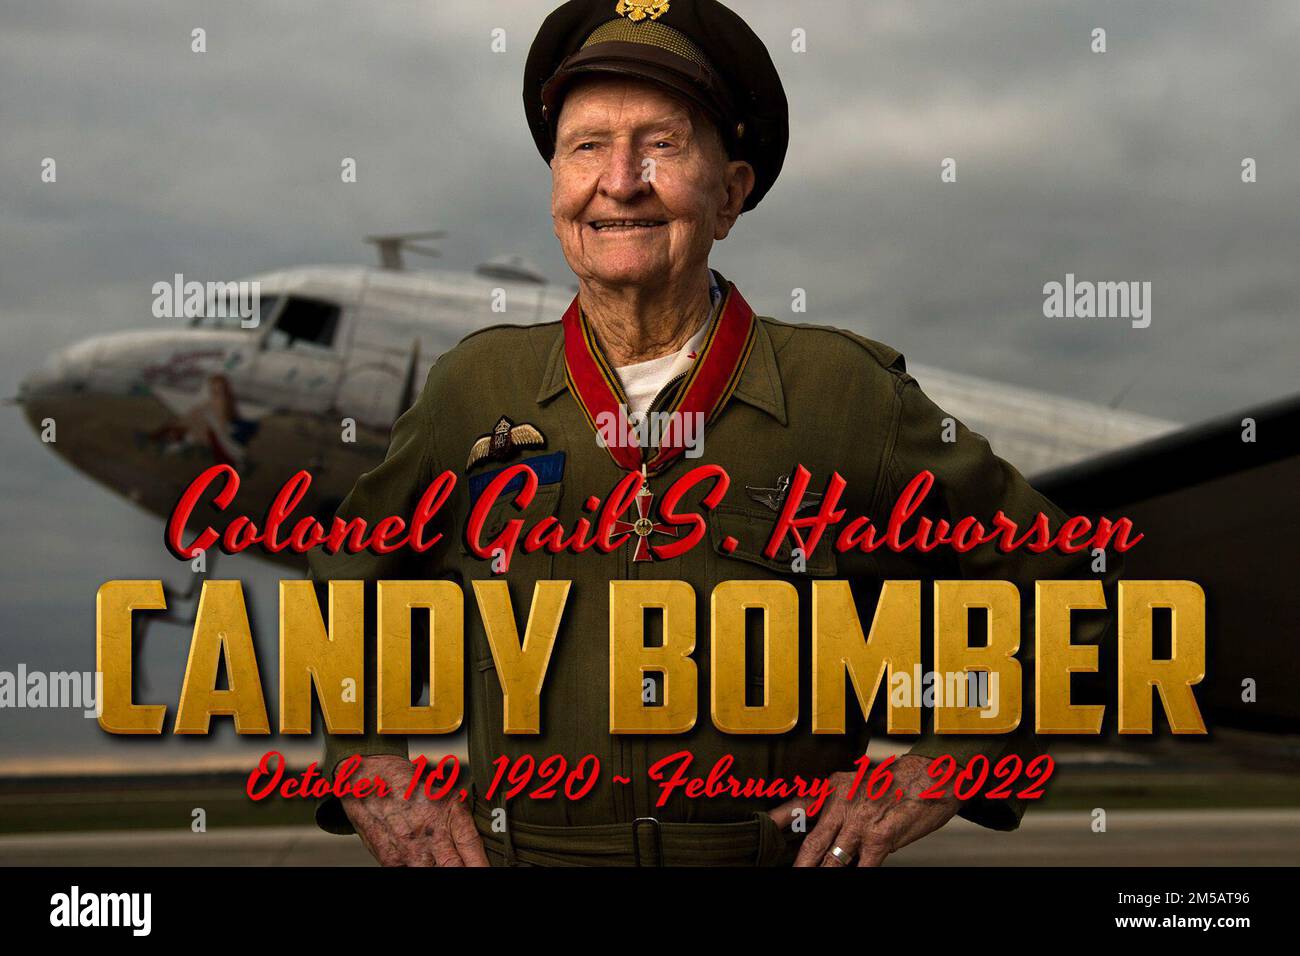 https://c8.alamy.com/comp/2M5AT96/retired-col-gail-s-halvorsen-more-prominently-known-as-the-candy-bomber-passed-away-february-17-2022-at-age-101-social-media-and-news-story-graphic-2M5AT96.jpg